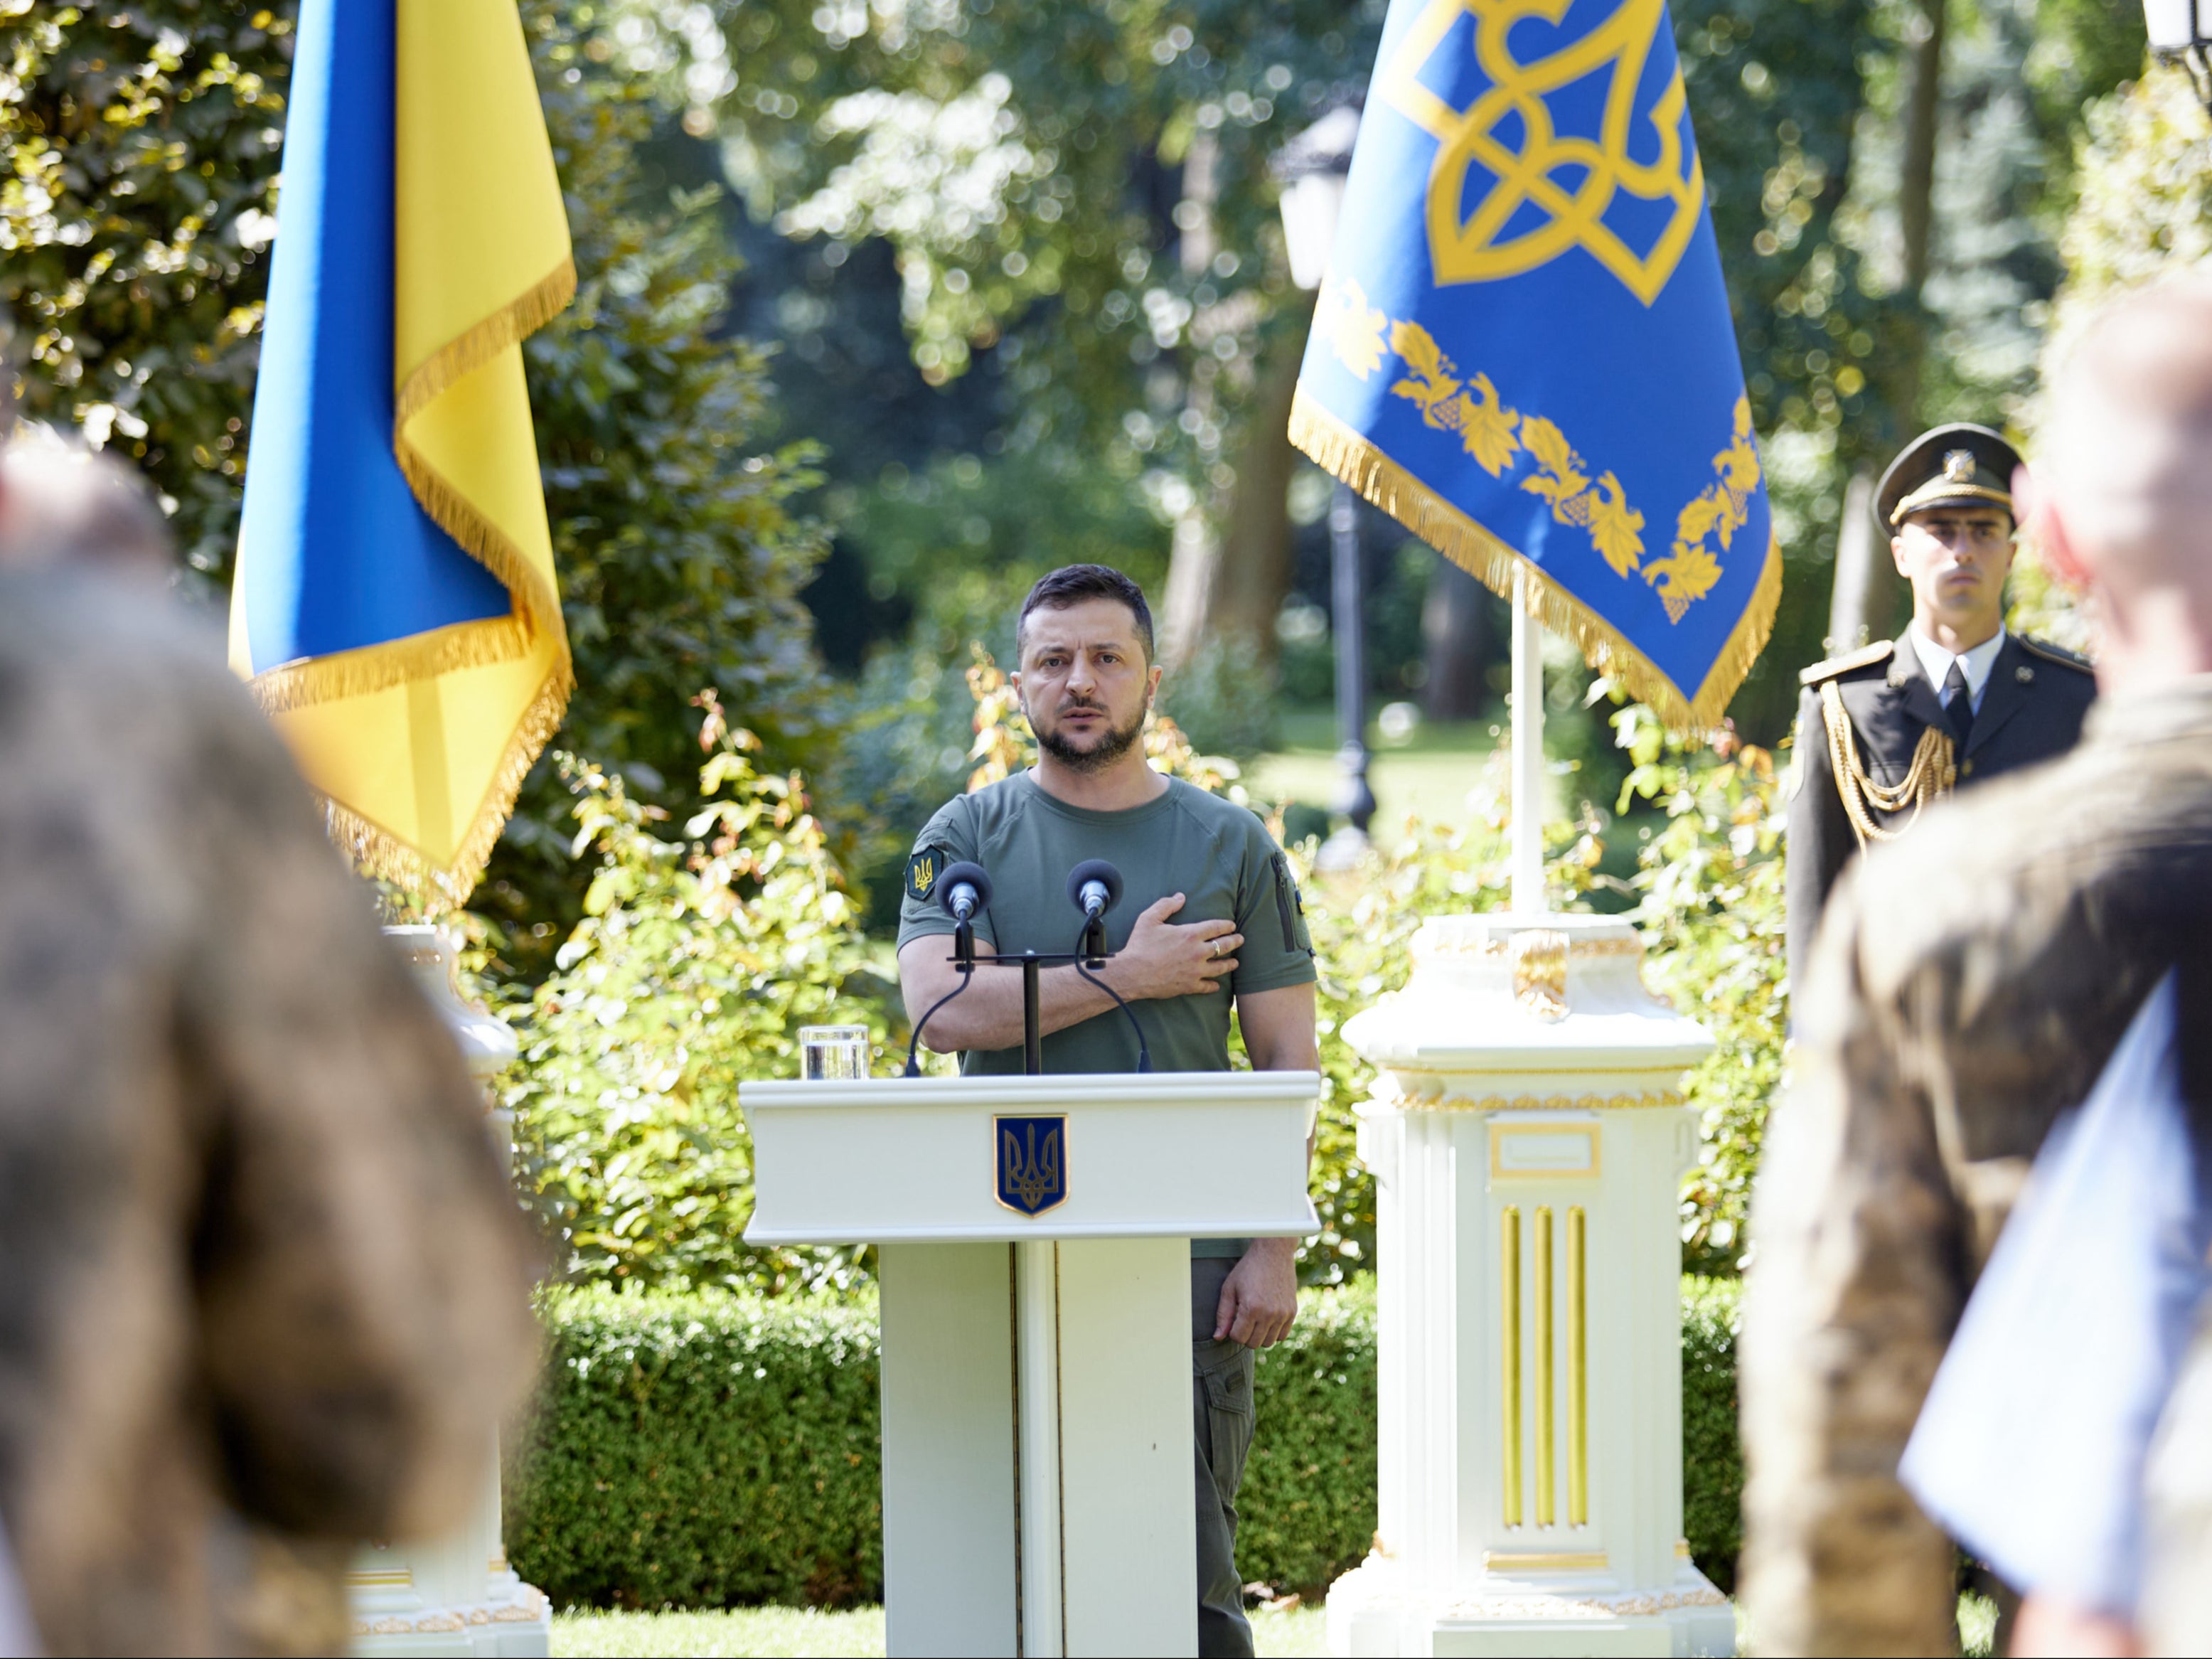 President Zelensky marking Ukraine’s day of independence from Soviet rule and the six-month anniversary of Russia’s invasion